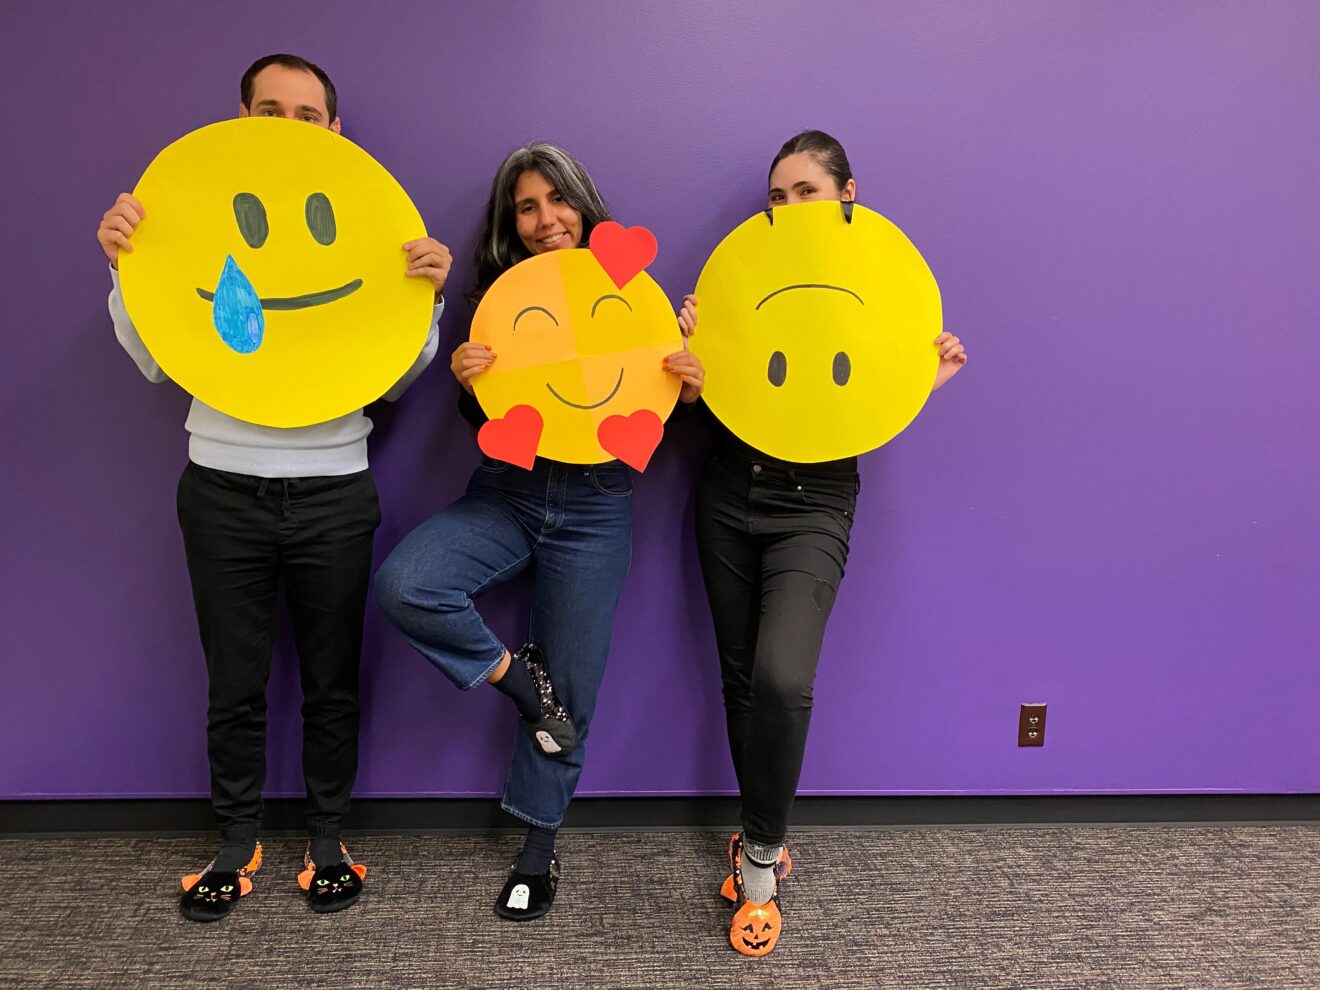 Three people lean against a purple wall holding yellow construction paper emojis in front of them to celebrate Halloween.